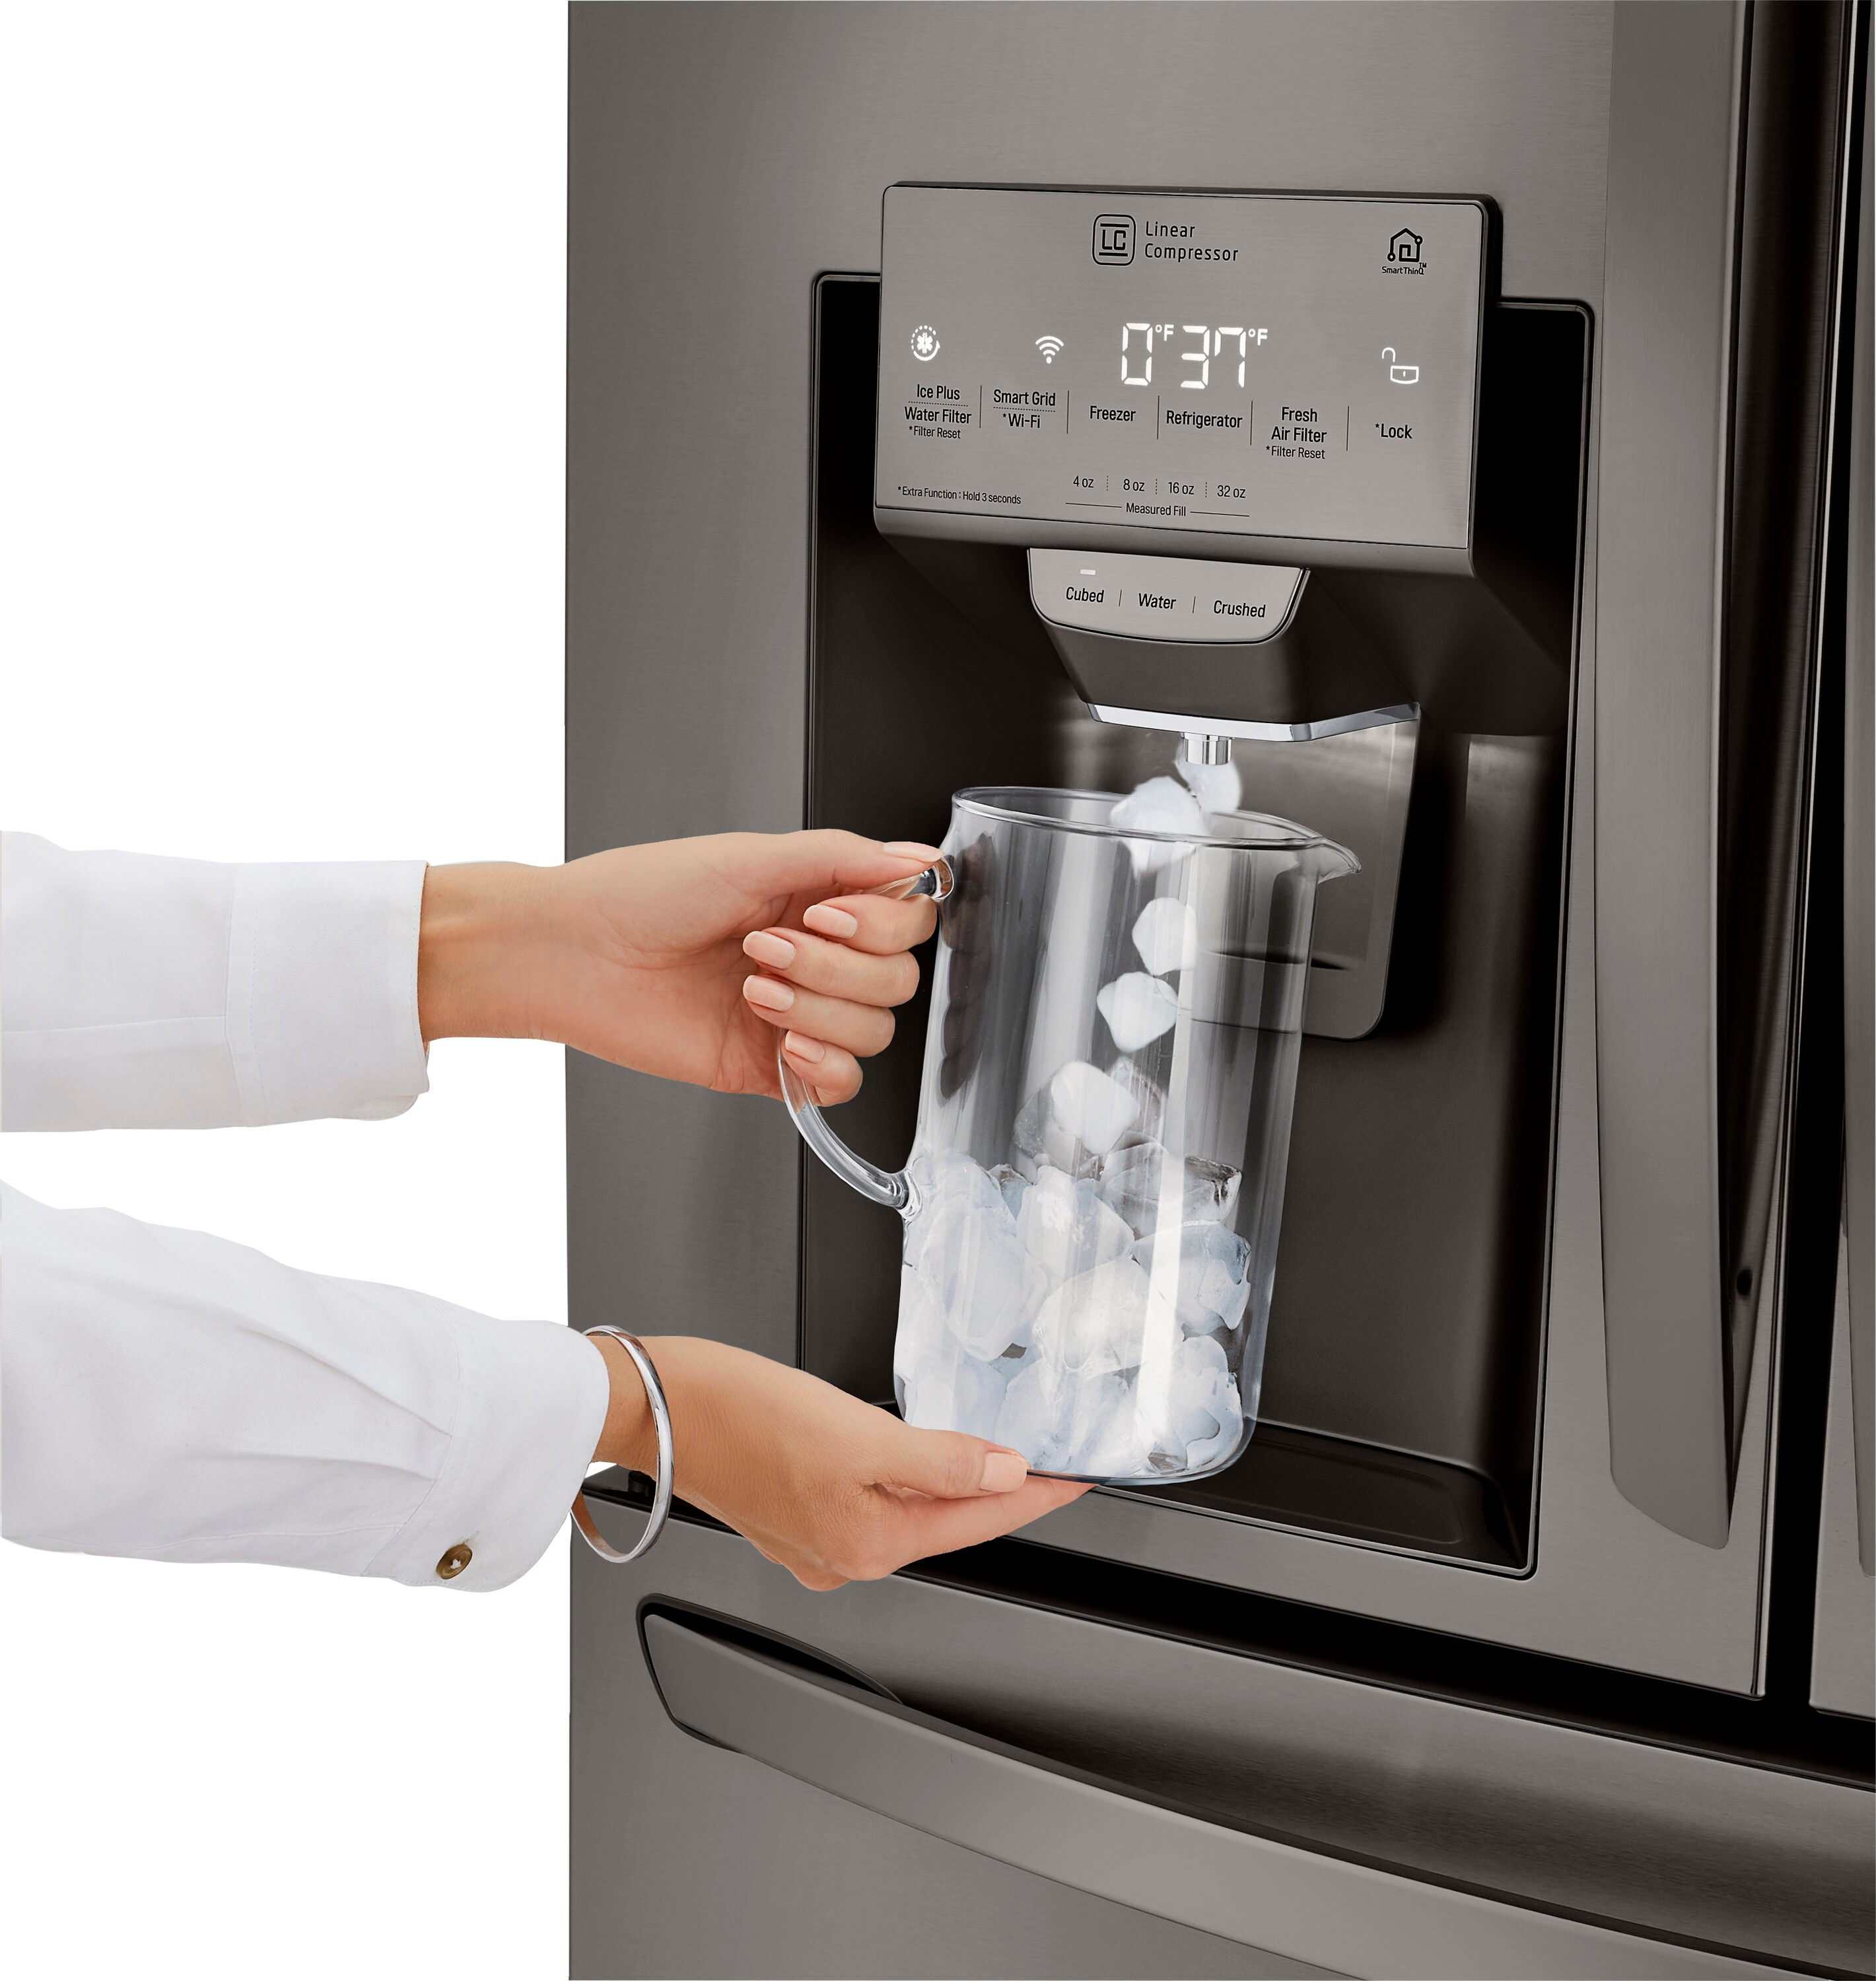 Refrigerator ice maker problems: Troubleshooting your ice maker